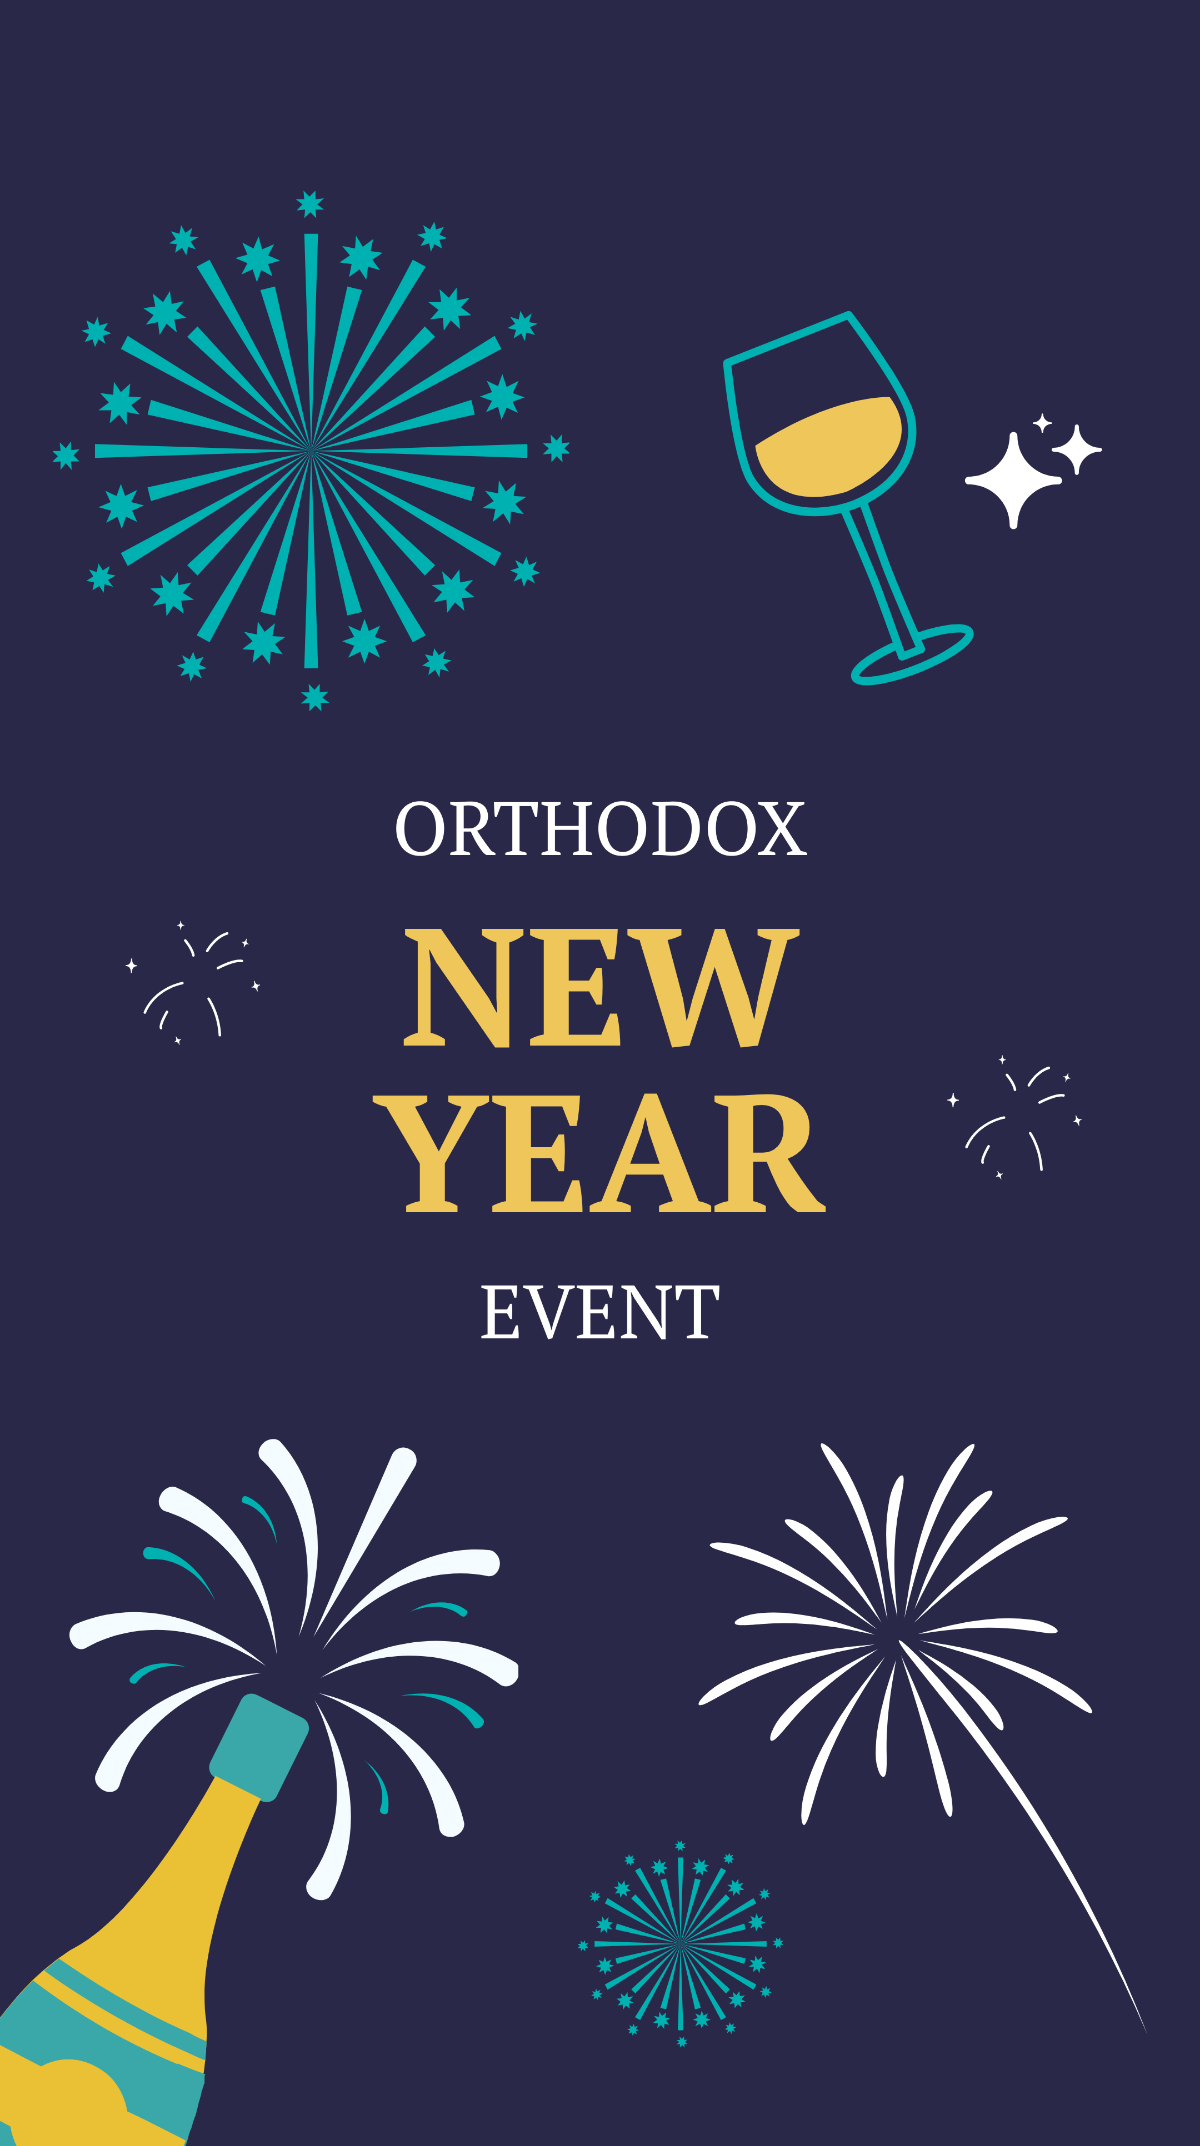 Orthodox New Year Event Instagram Story